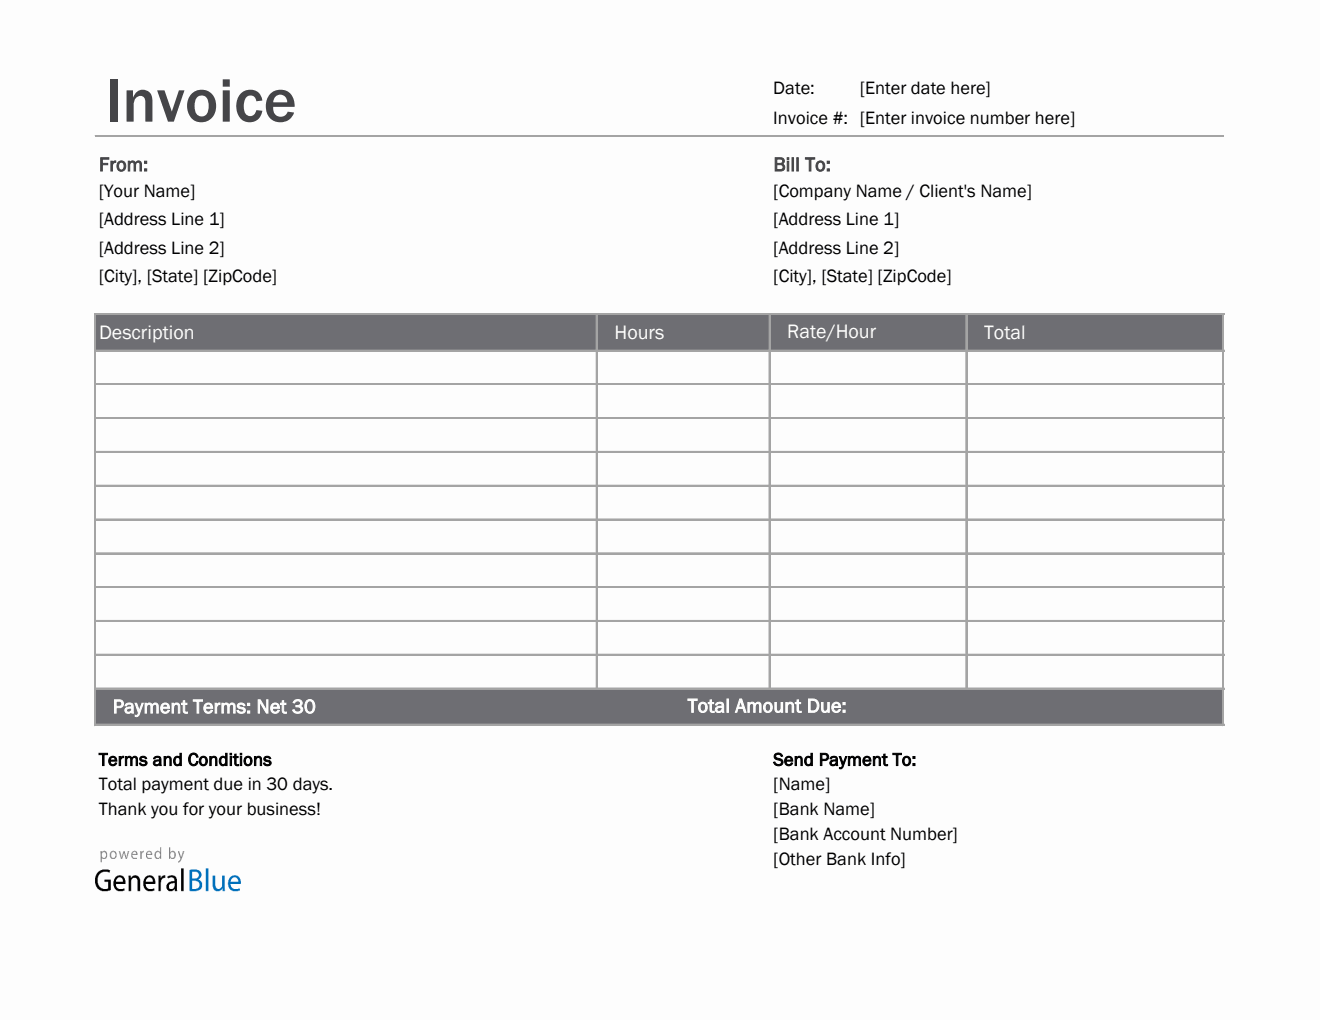 Invoice Template for U.S. Freelancers in Excel (Basic)